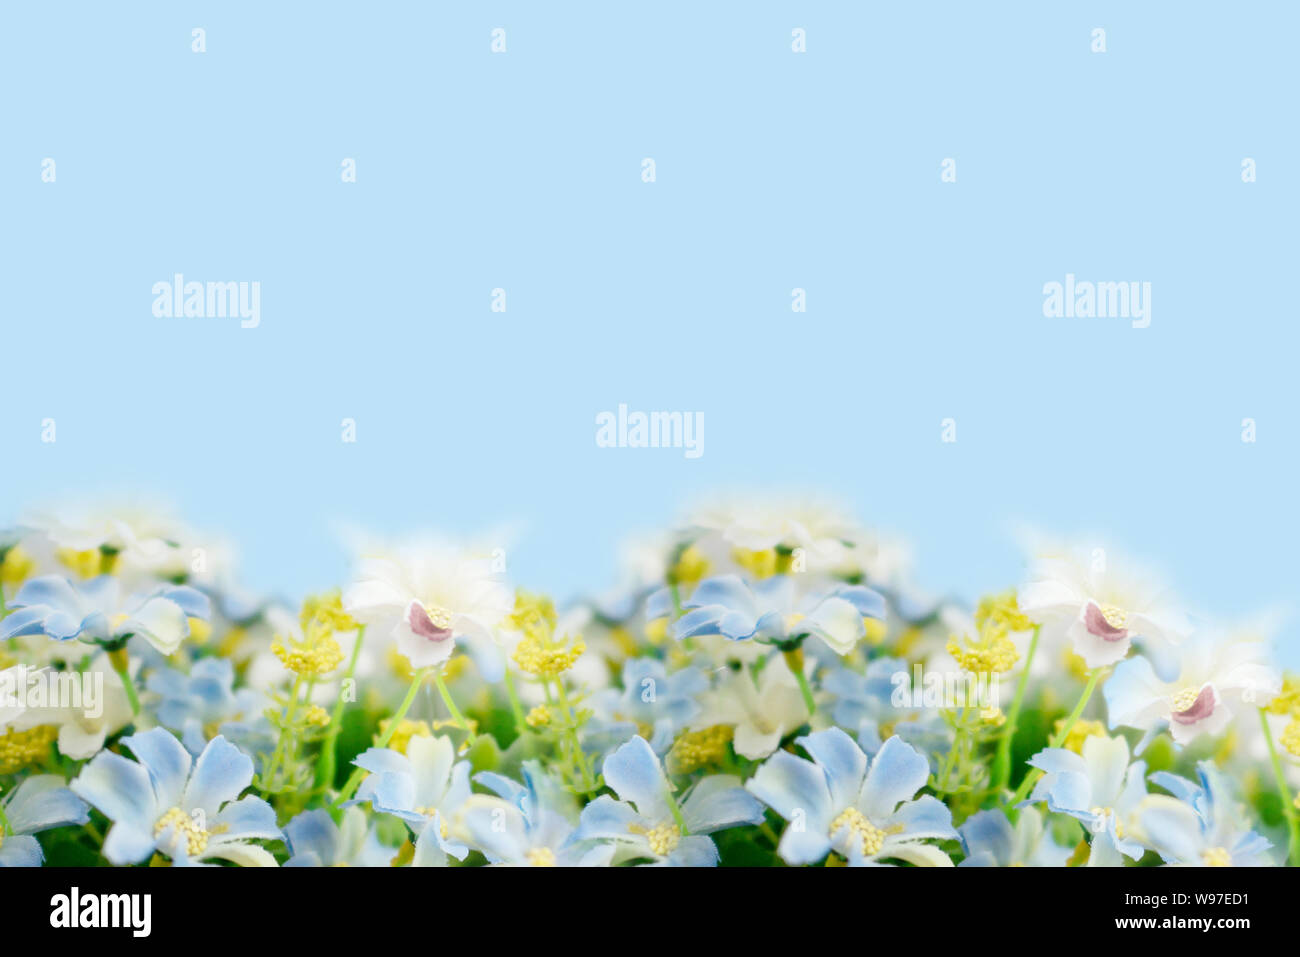 Blurred flowers and yellow pollen with green leaf. Blooming of fake flower on soft blue background with copy space for text. Stock Photo